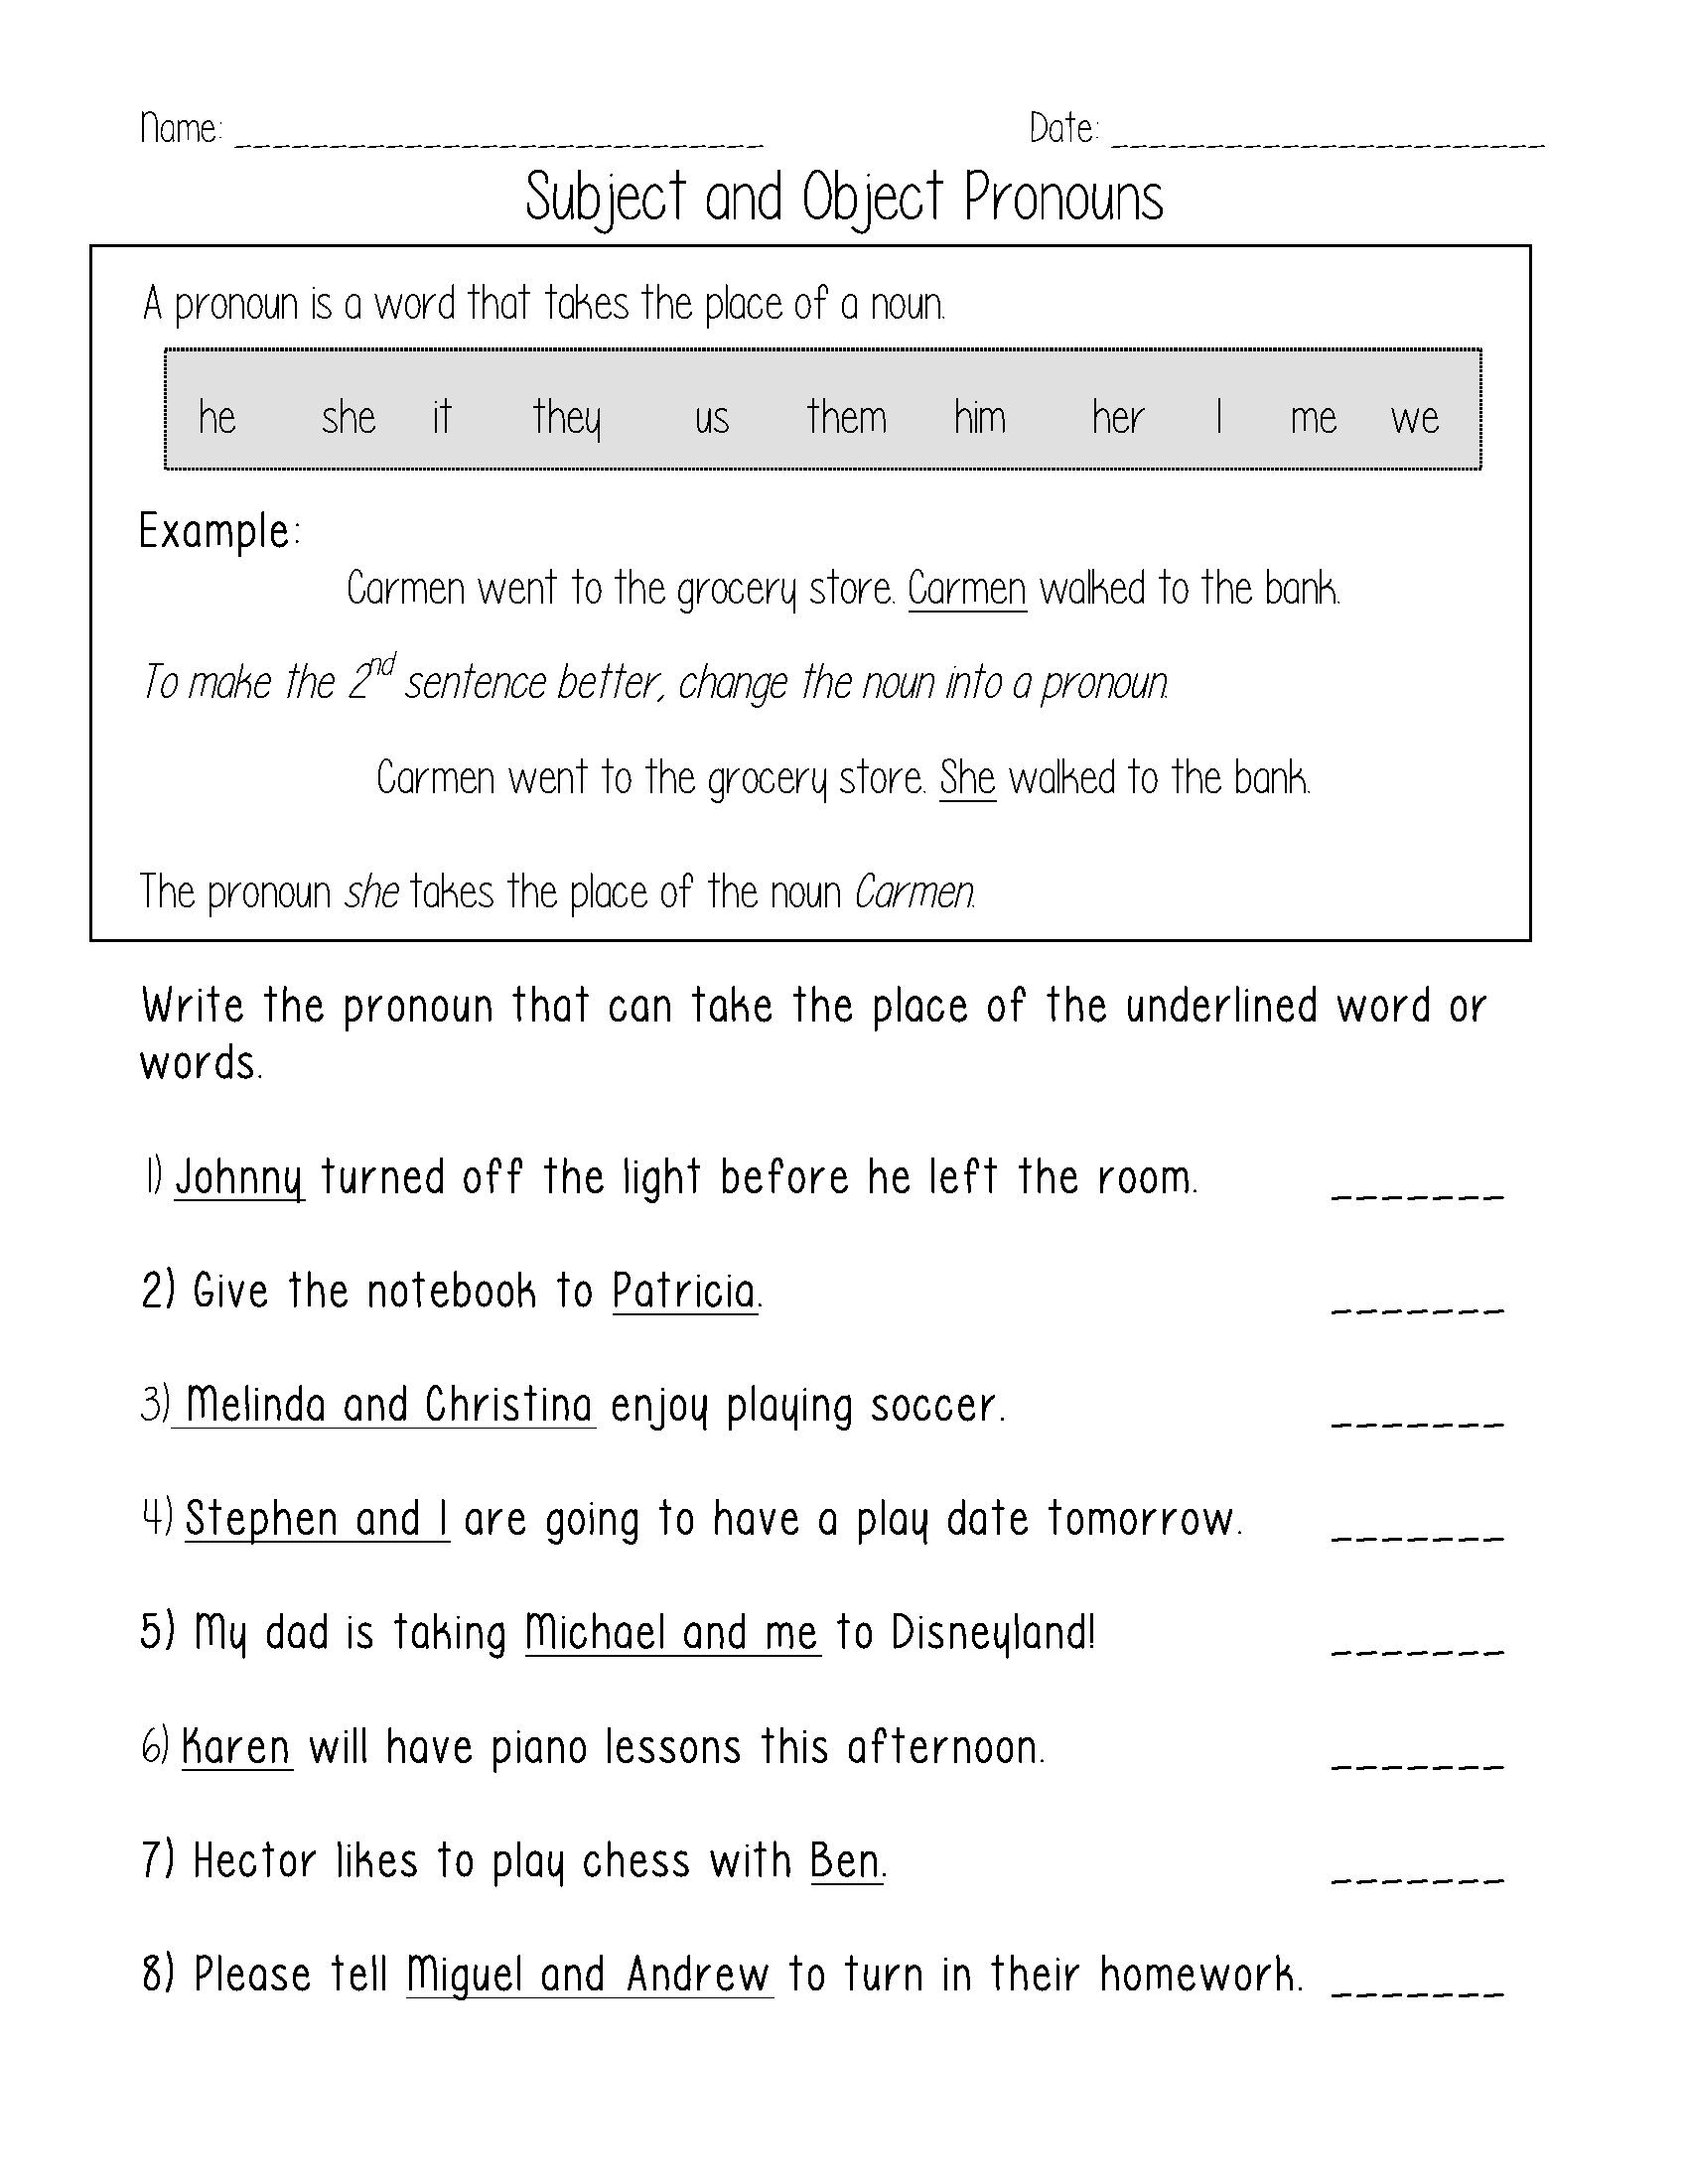 17-best-images-of-punctuation-practice-worksheets-punctuation-worksheets-grade-3-missing